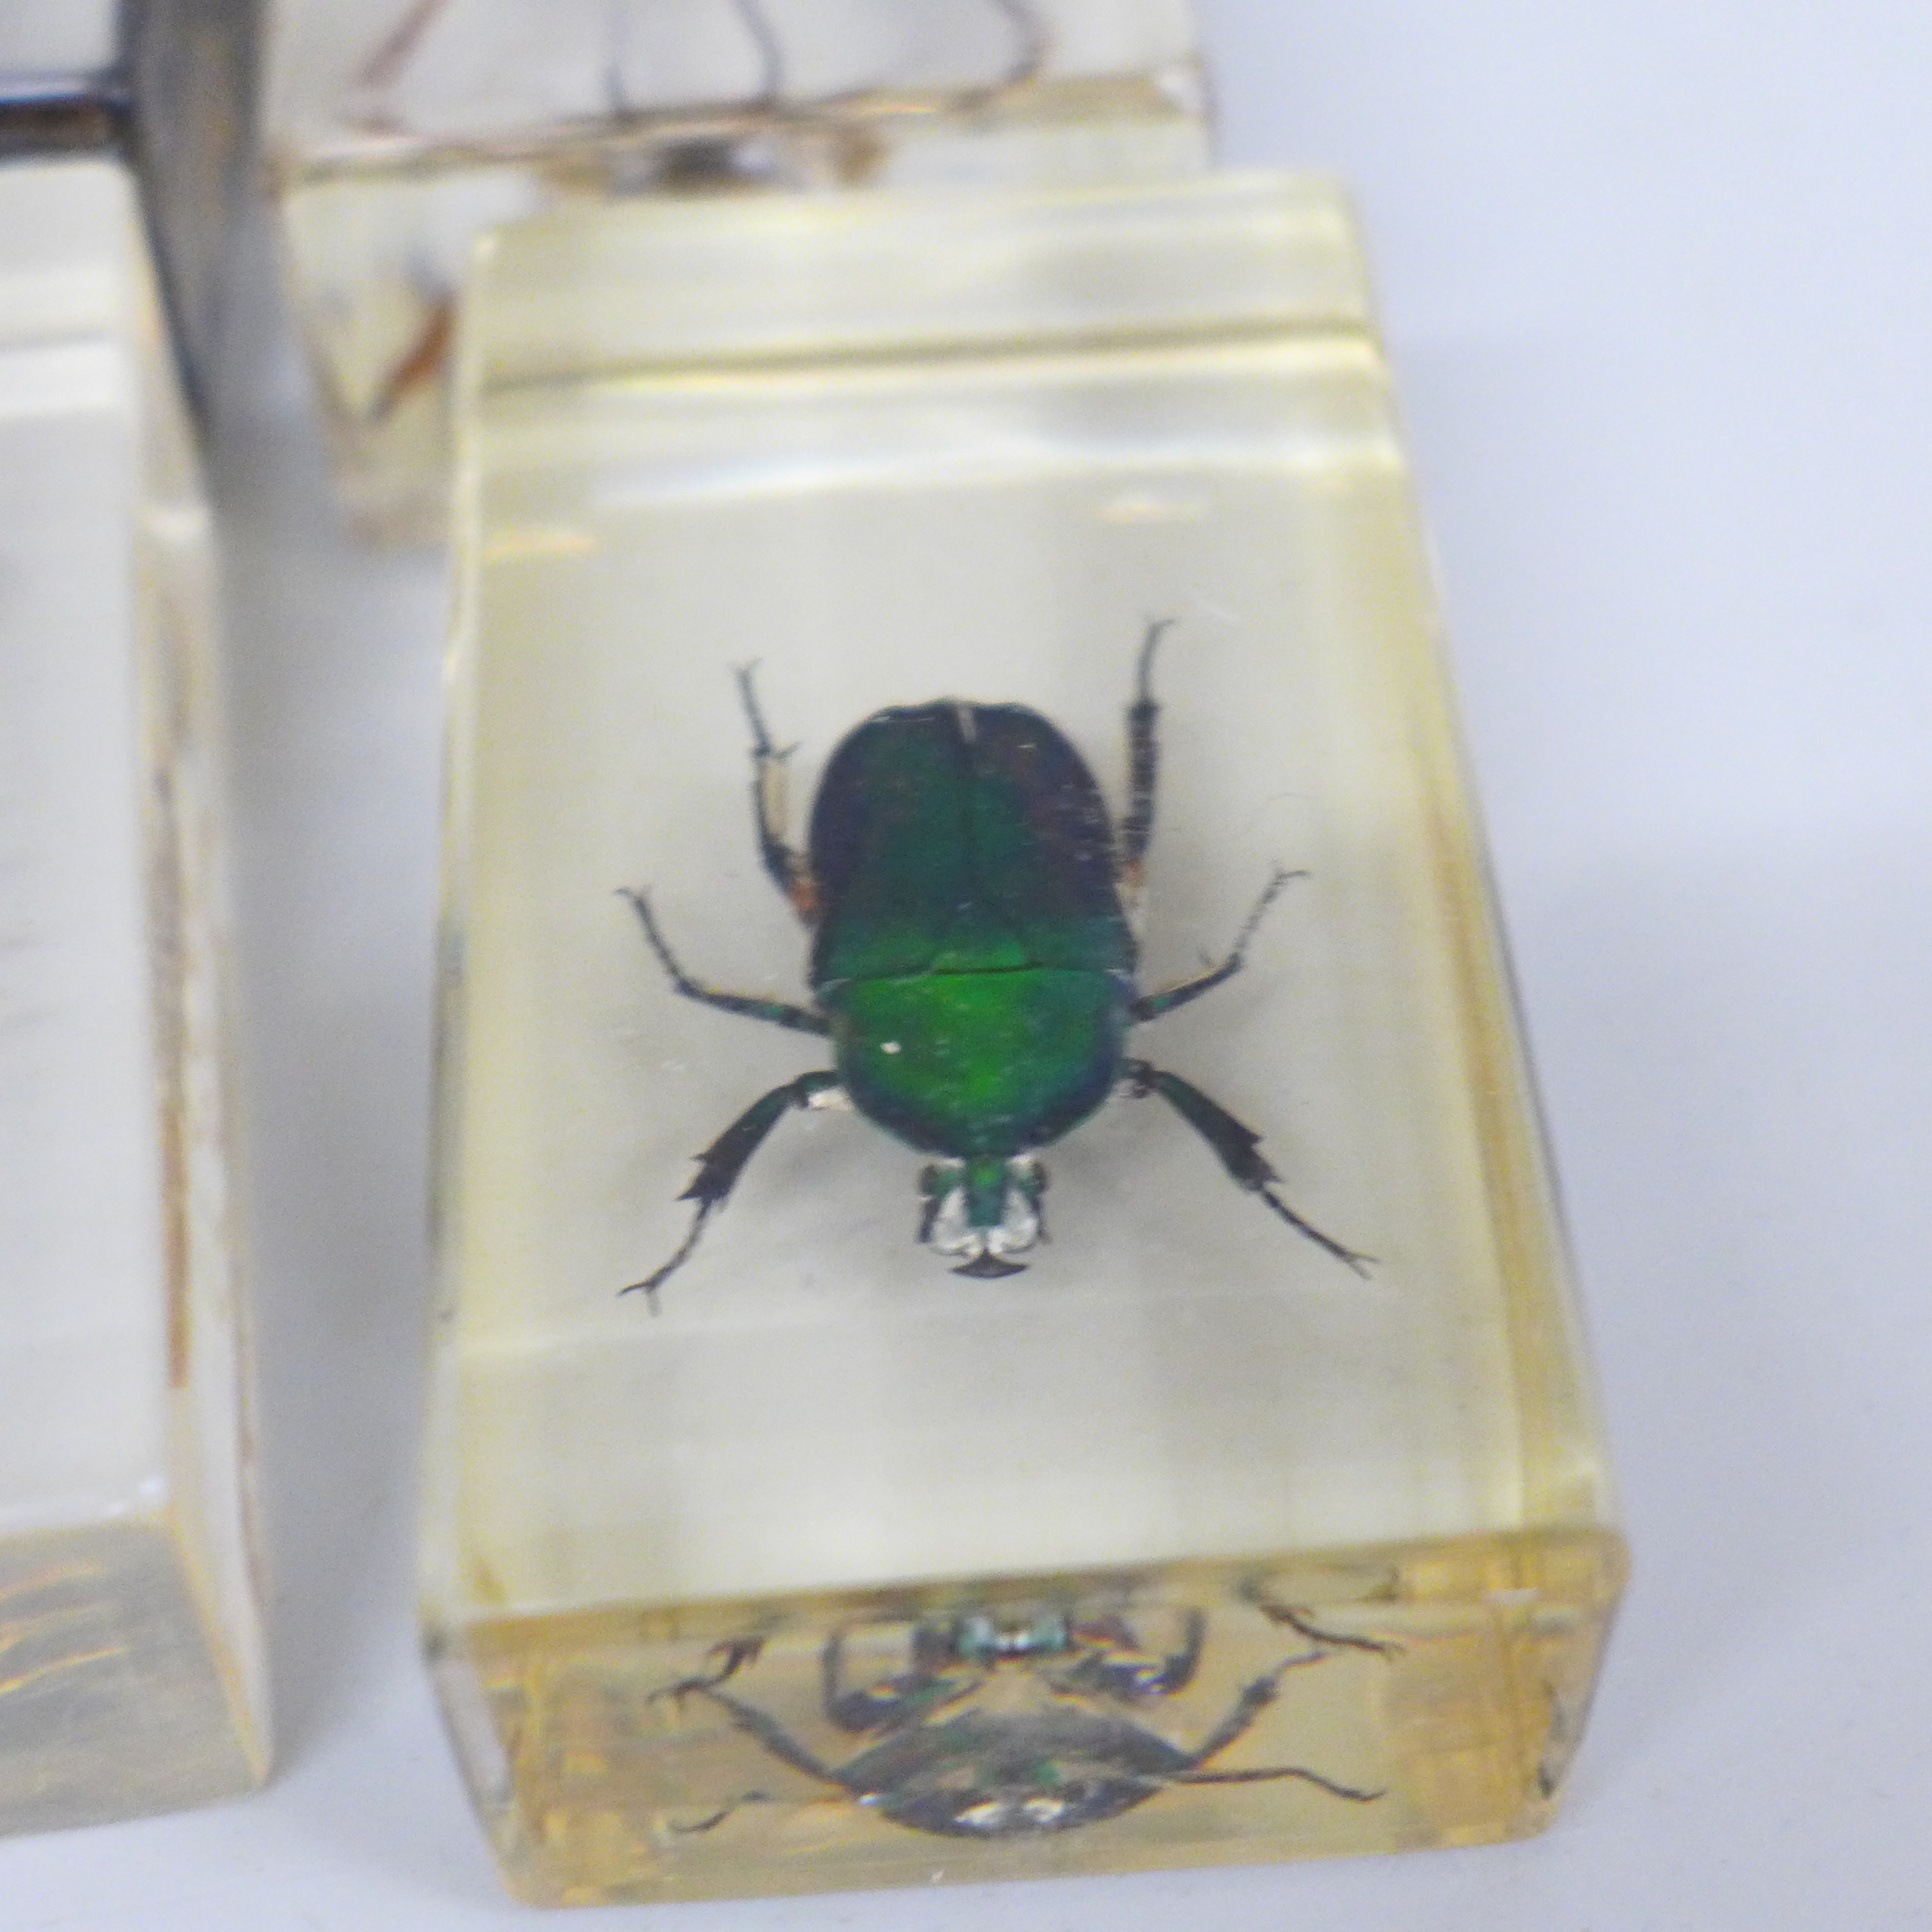 Eight insect specimens in resin, including Giant Scorpion and Rhinoceros Beetle - Image 4 of 4